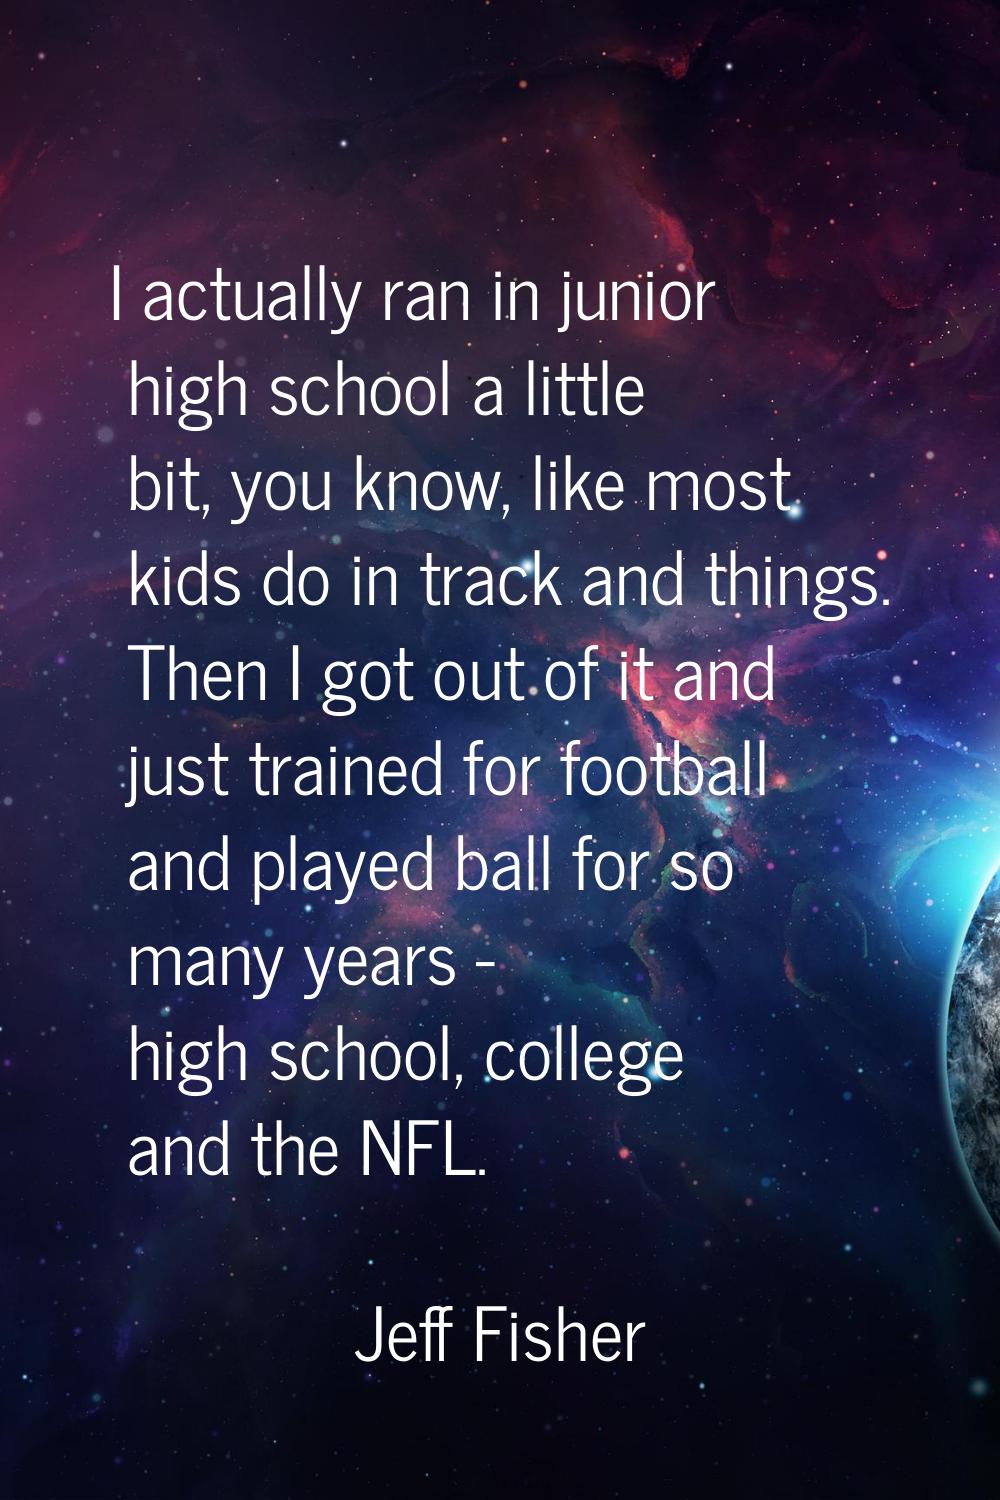 I actually ran in junior high school a little bit, you know, like most kids do in track and things.